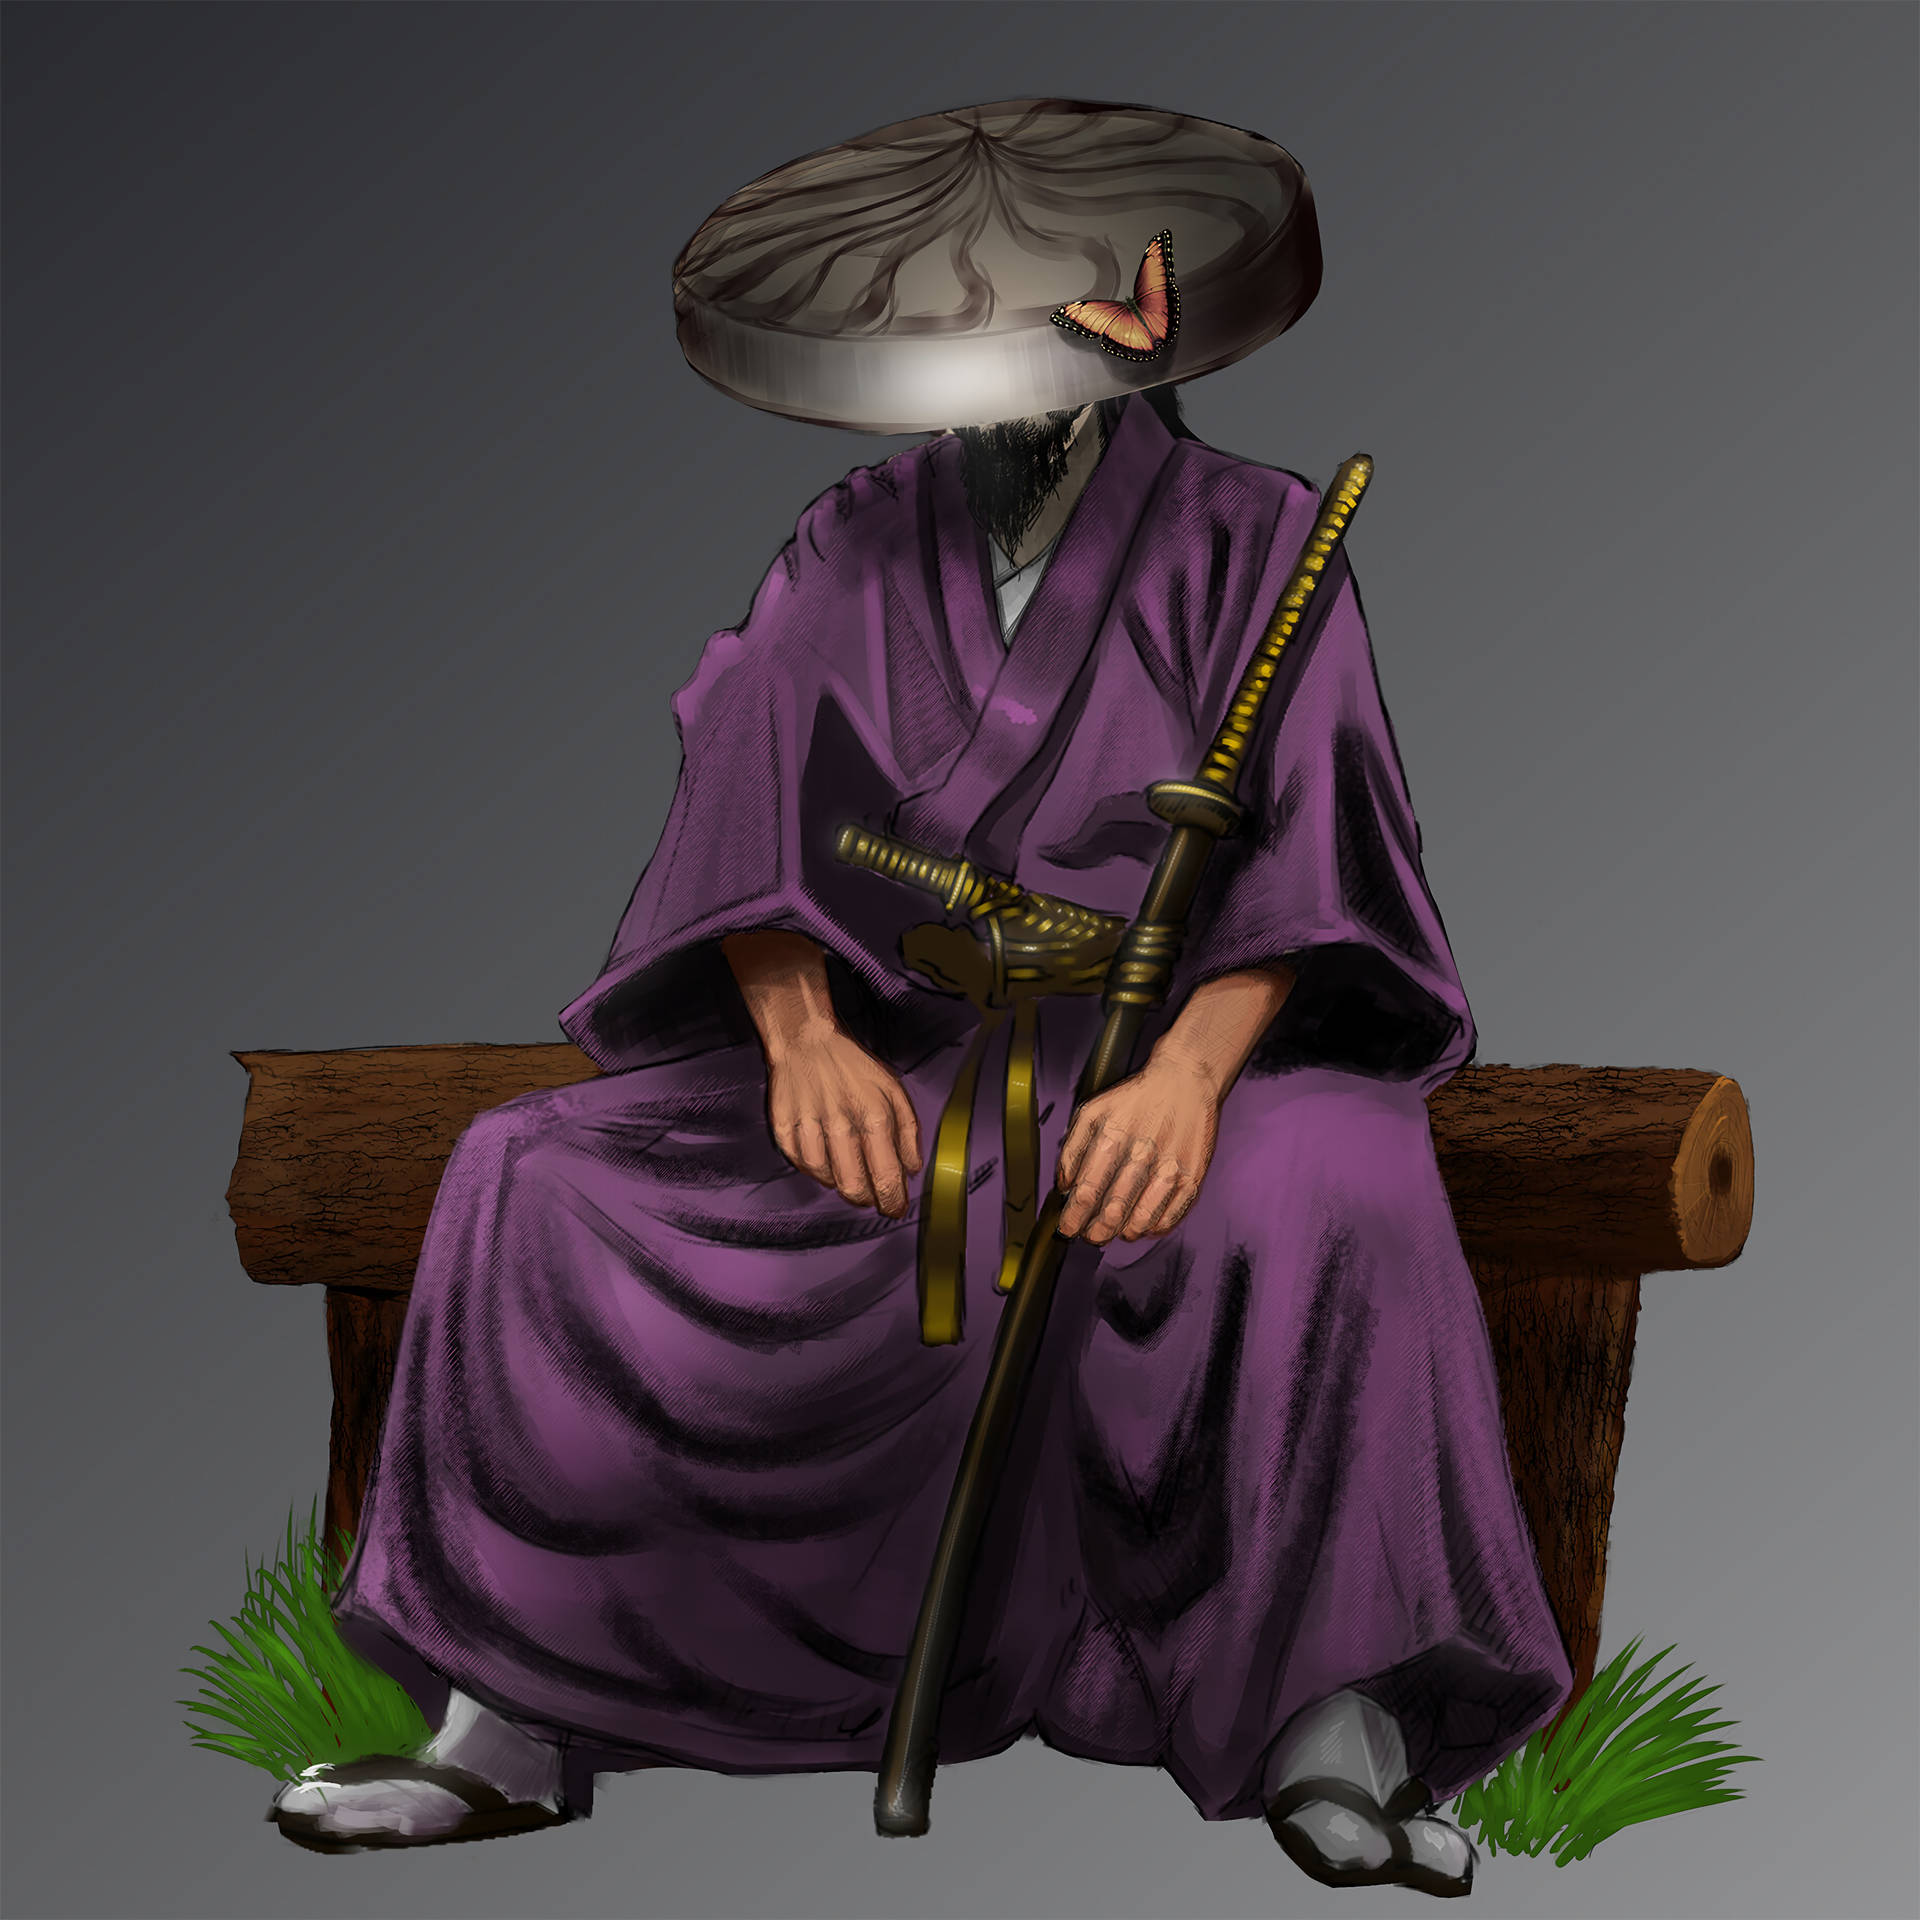 A Seated And Noble Samurai With A Fierce Look